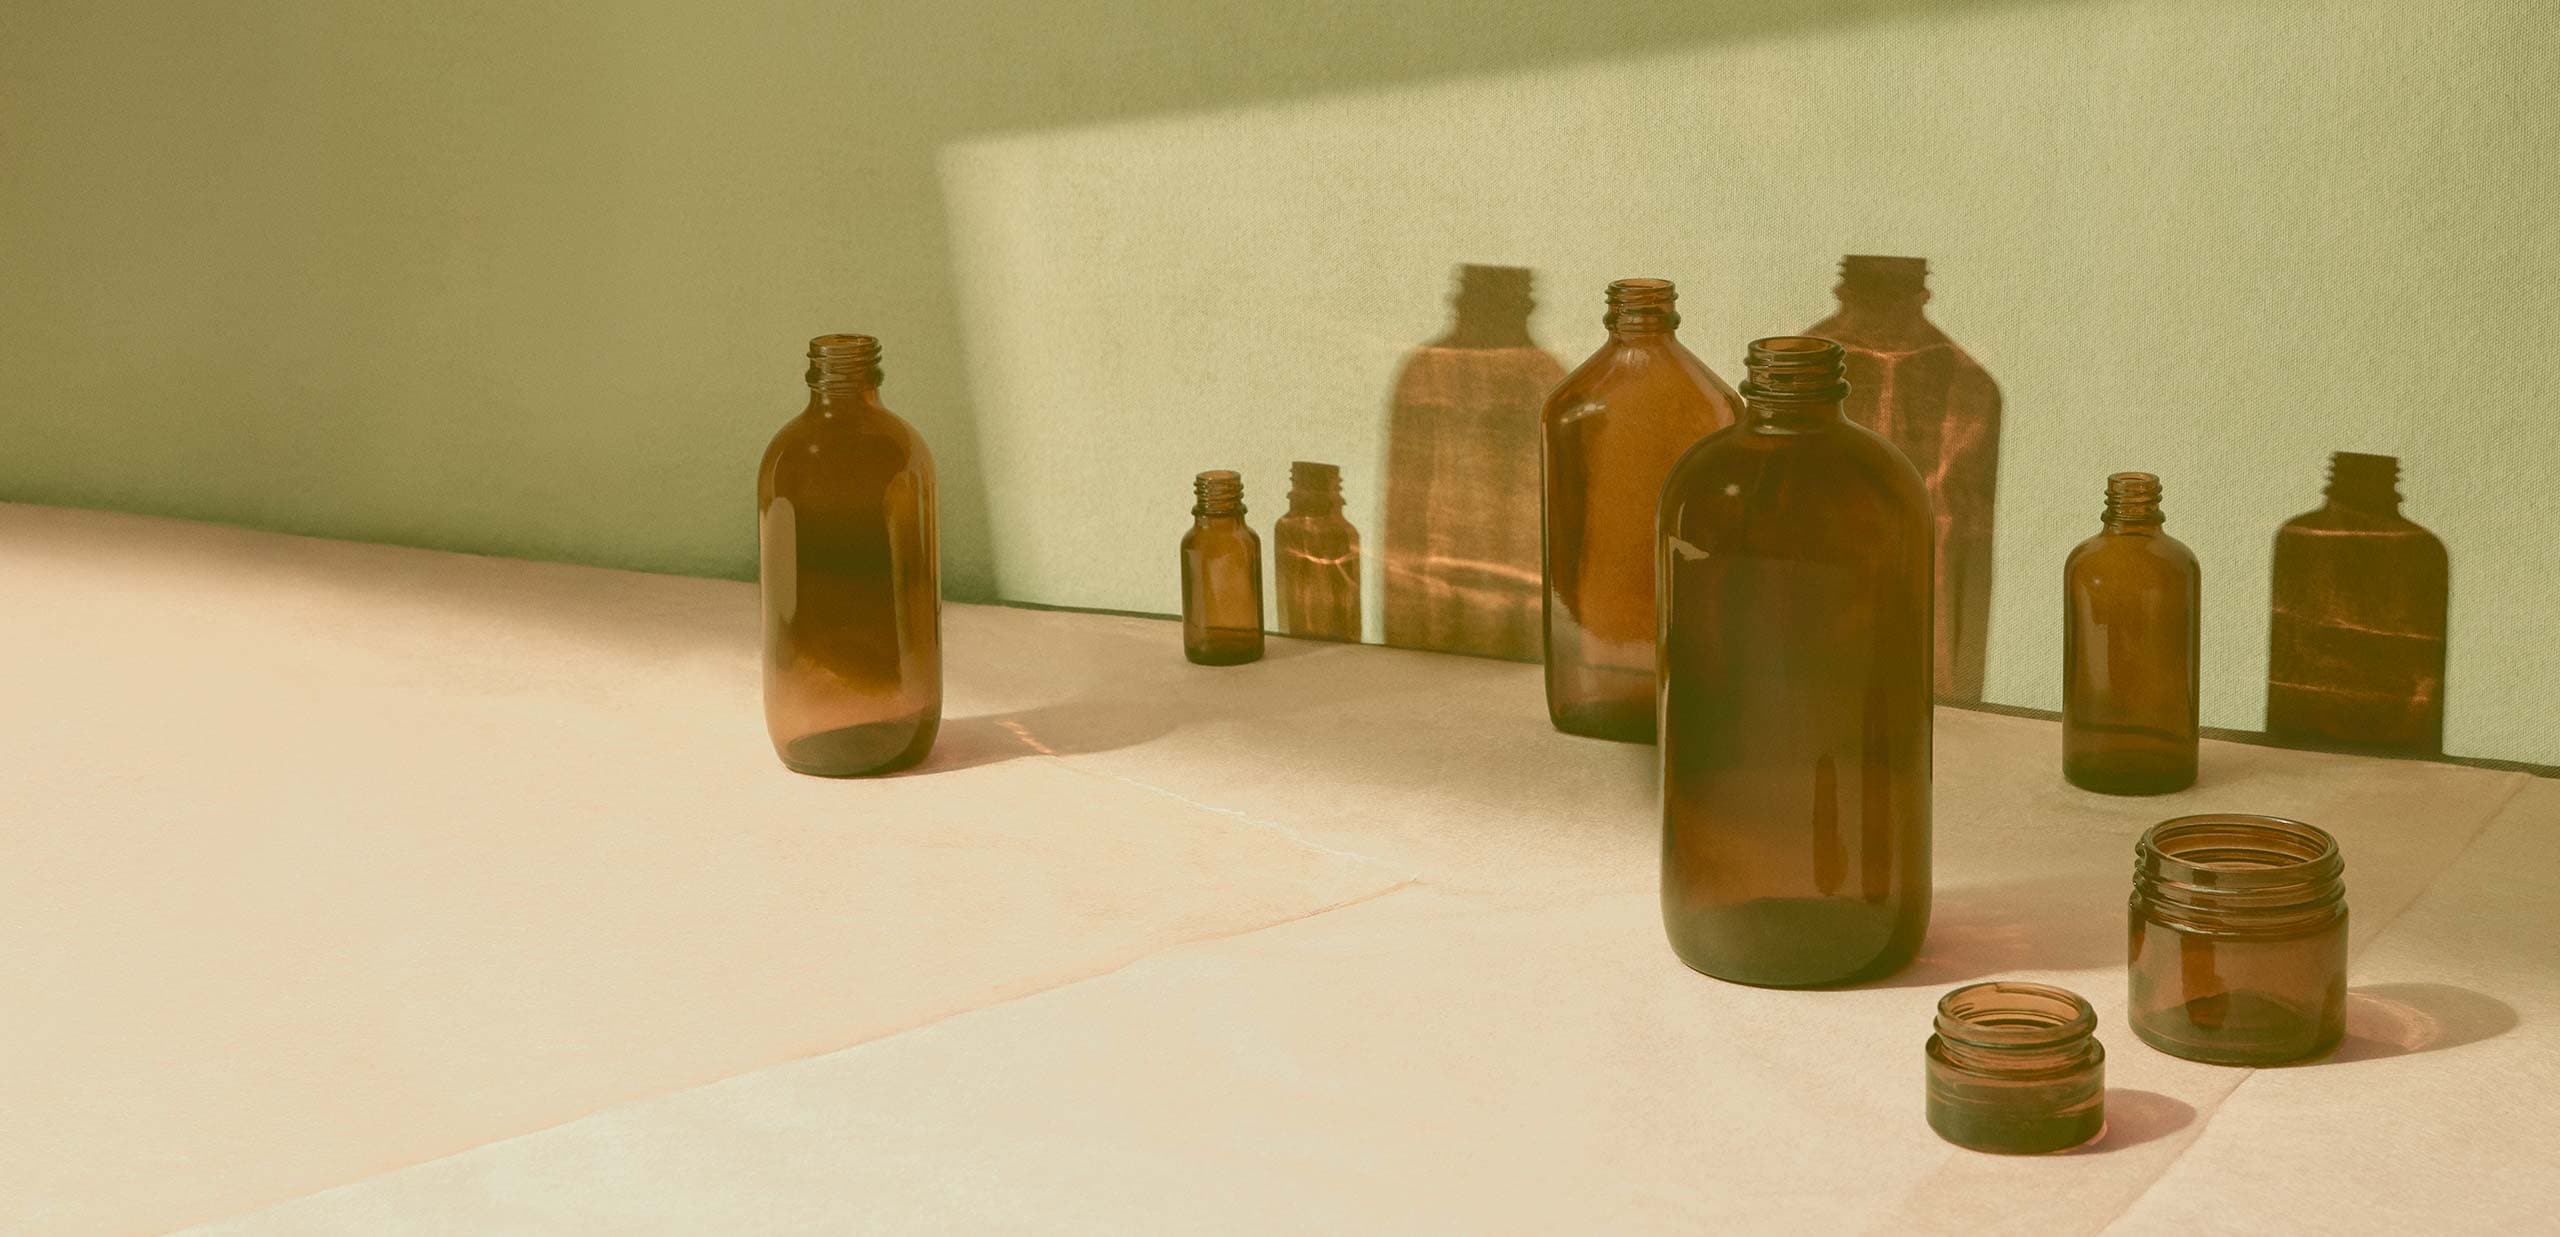 Brown bottles sit on a platform with sunlight reflecting their shadows.